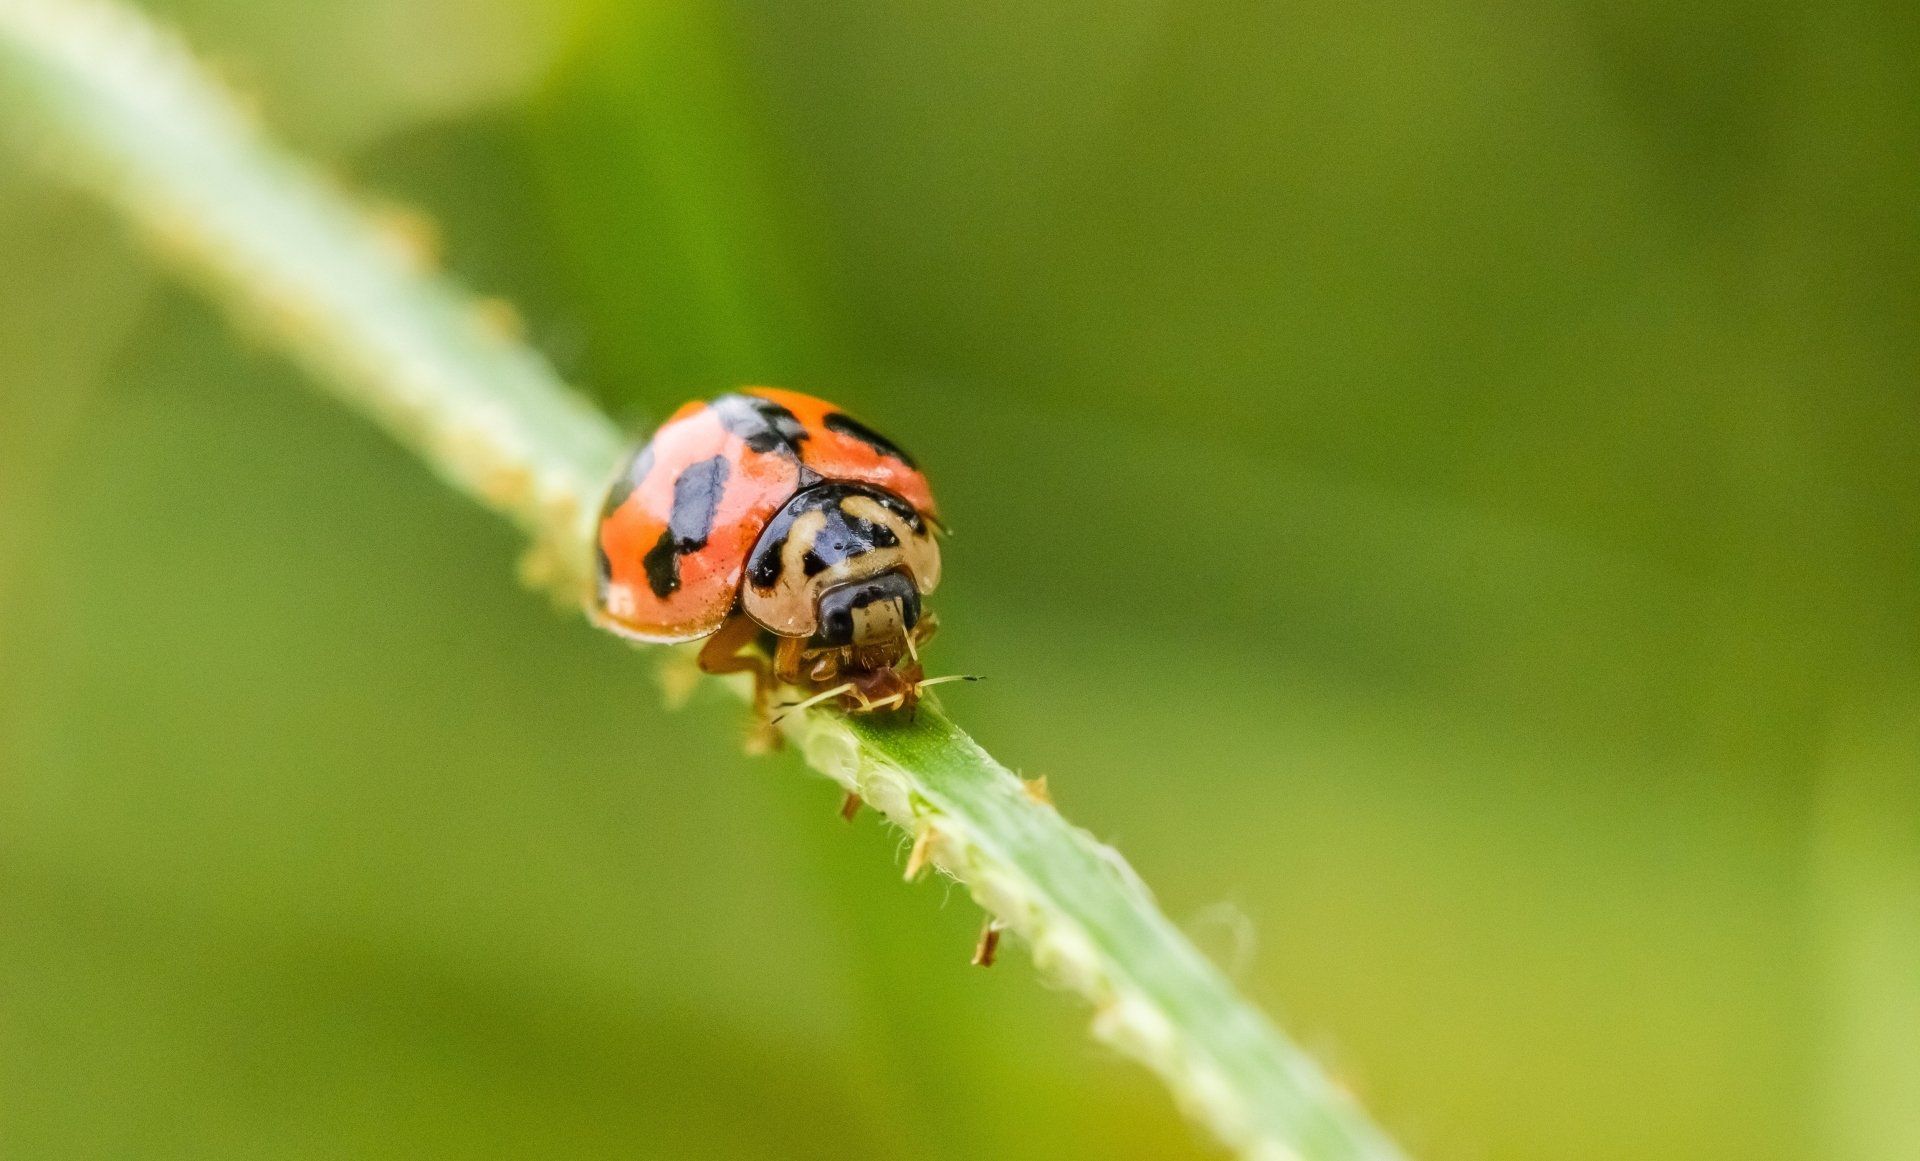 Facts about Asian lady beetles